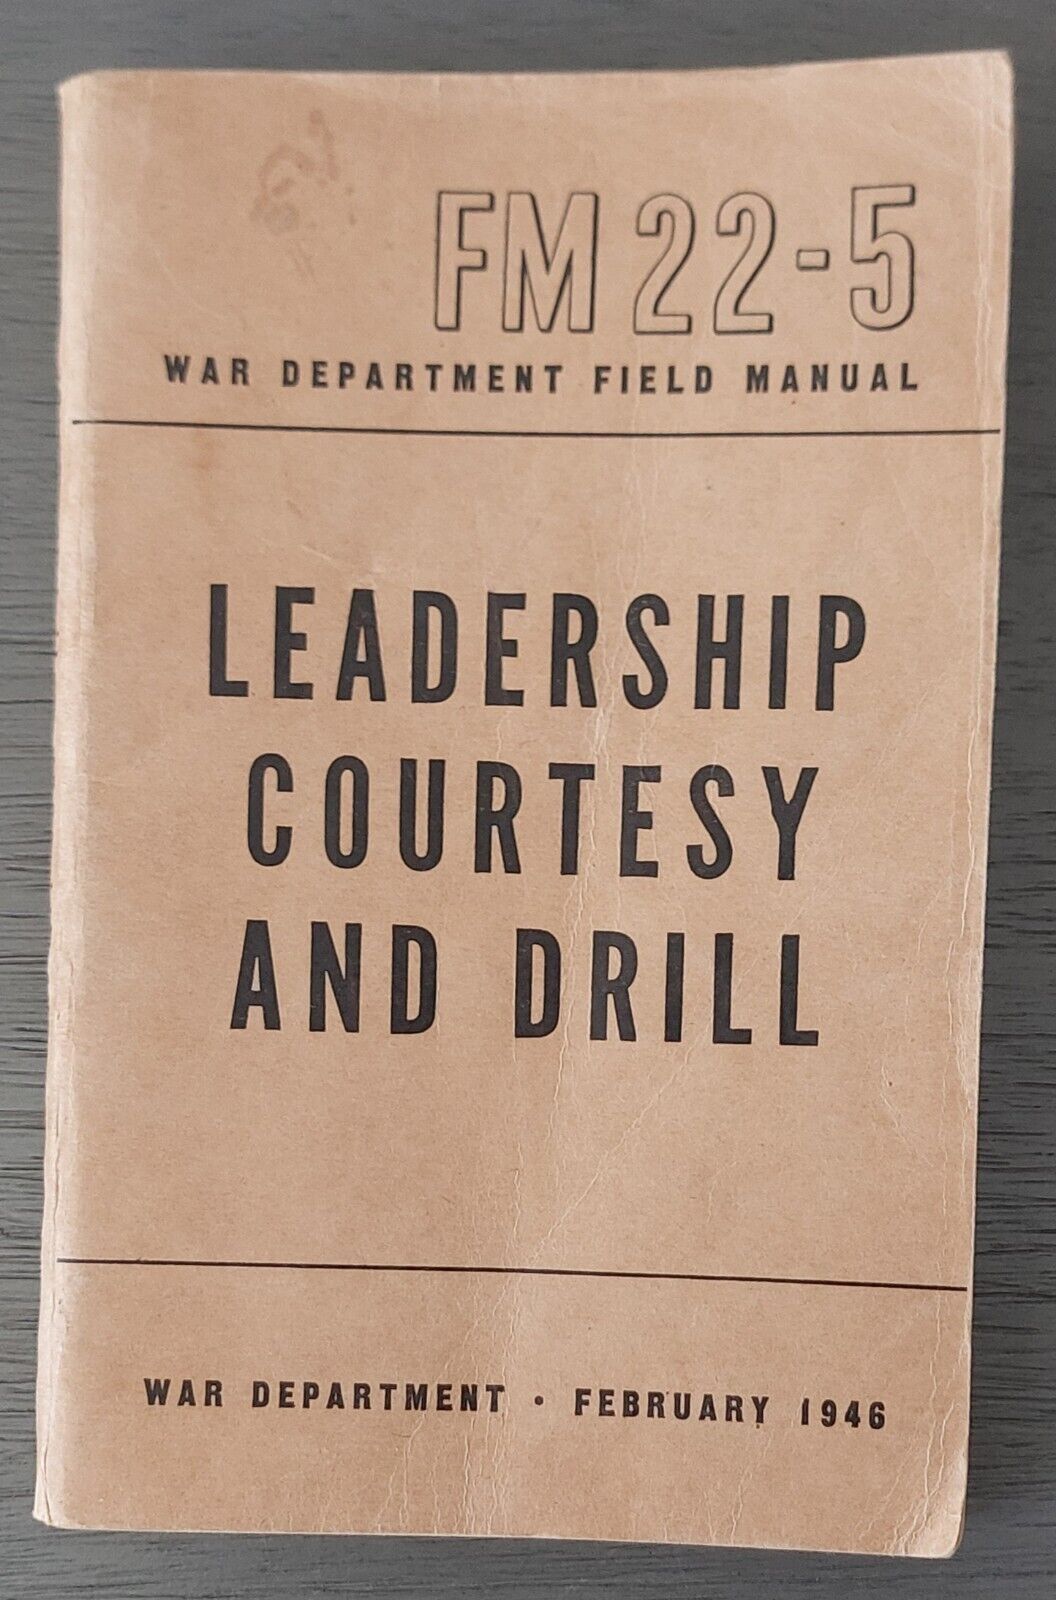 Vintage 1946 Leadership Courtesy and Drill US Army FM 22-5 Field Book